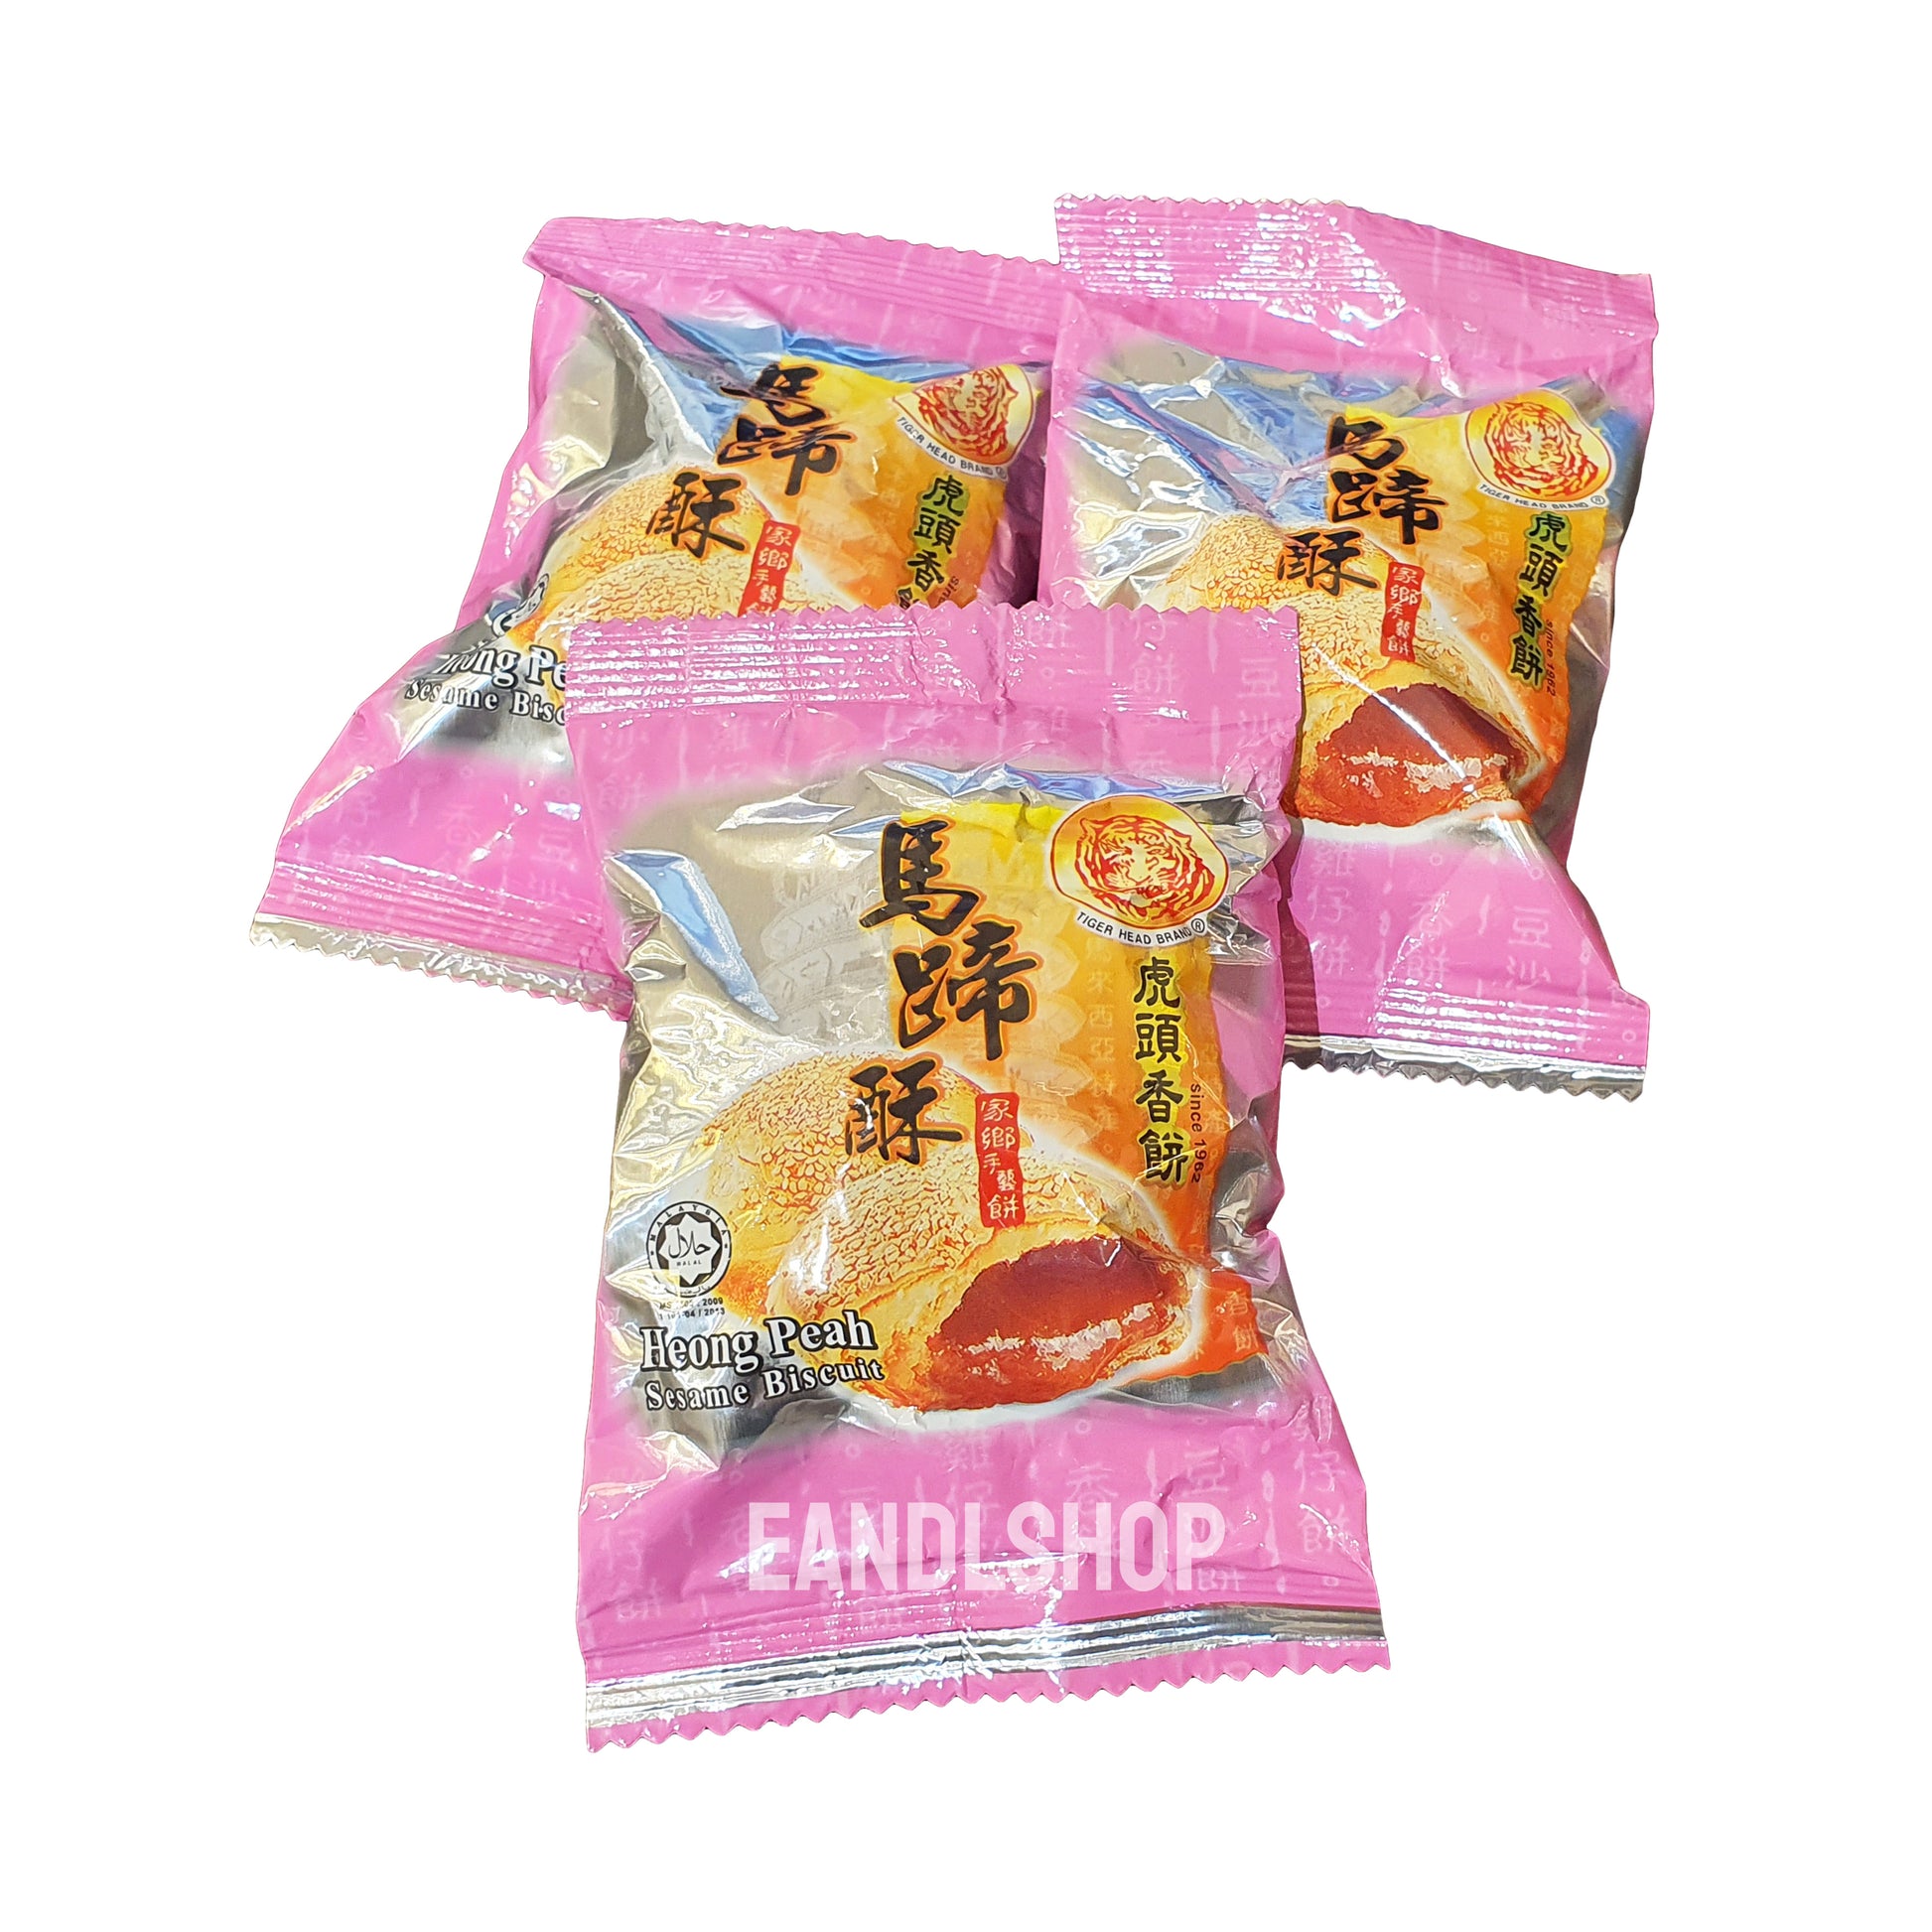 Tiger Head Brand Heong Peah. Old-school biscuits, modern snacks (chips, crackers), cakes, gummies, plums, dried fruits, nuts, herbal tea – available at www.EANDLSHOP.com